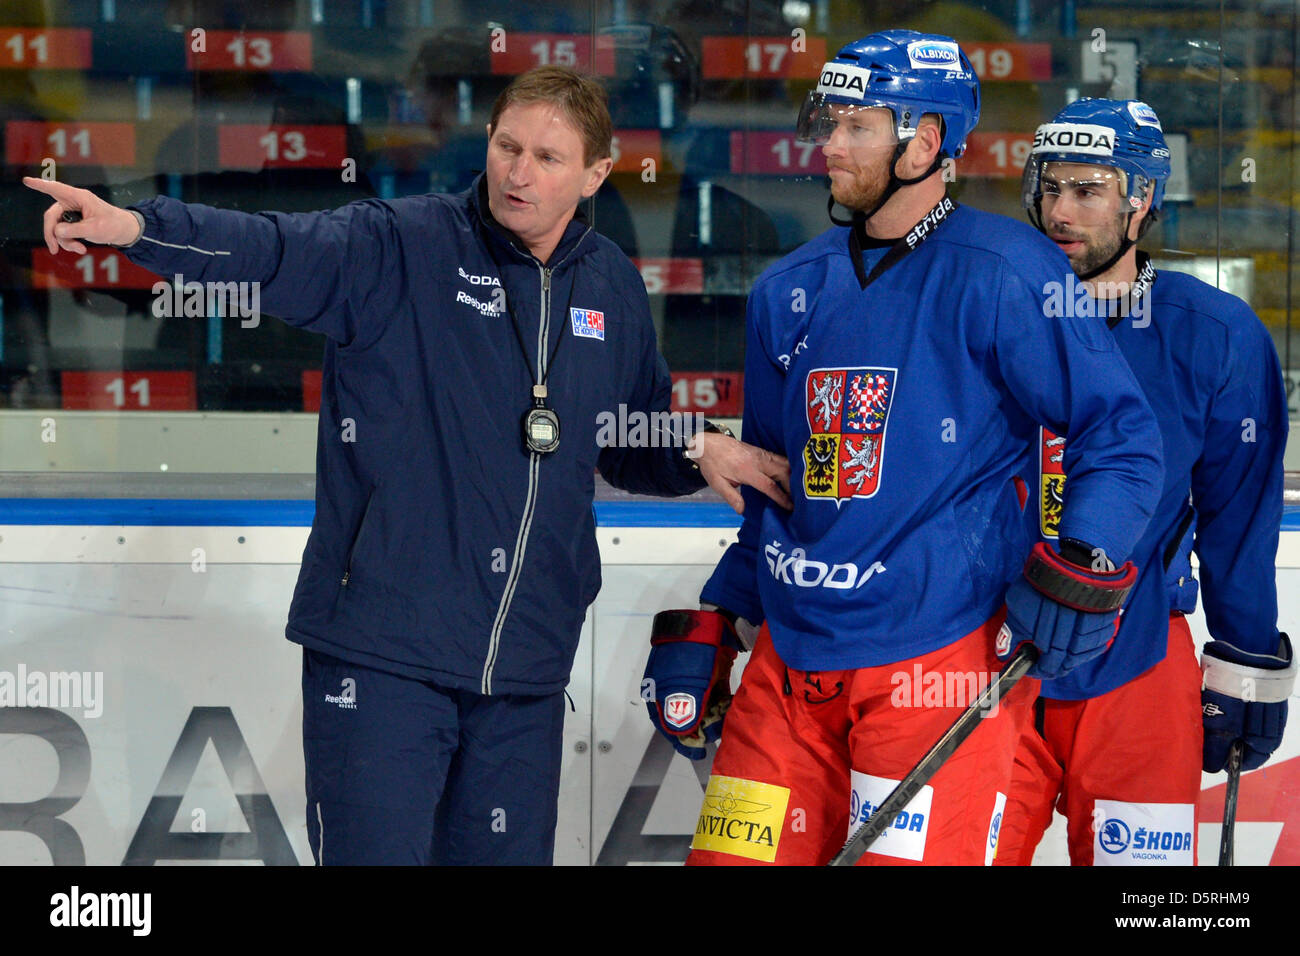 Prague, Czech Republic. 8th April, 2013. From left: Czech coach Alois Hadamczik, player Jiri Novotny and Zbynek Irgl are seen during the training session of Czech national ice hockey team prior to the preparatory matches for the Ice Hockey World Championship in Prague, Czech Republic, April 8, 2013. (CTK Photo/Vit Simanek) Stock Photo